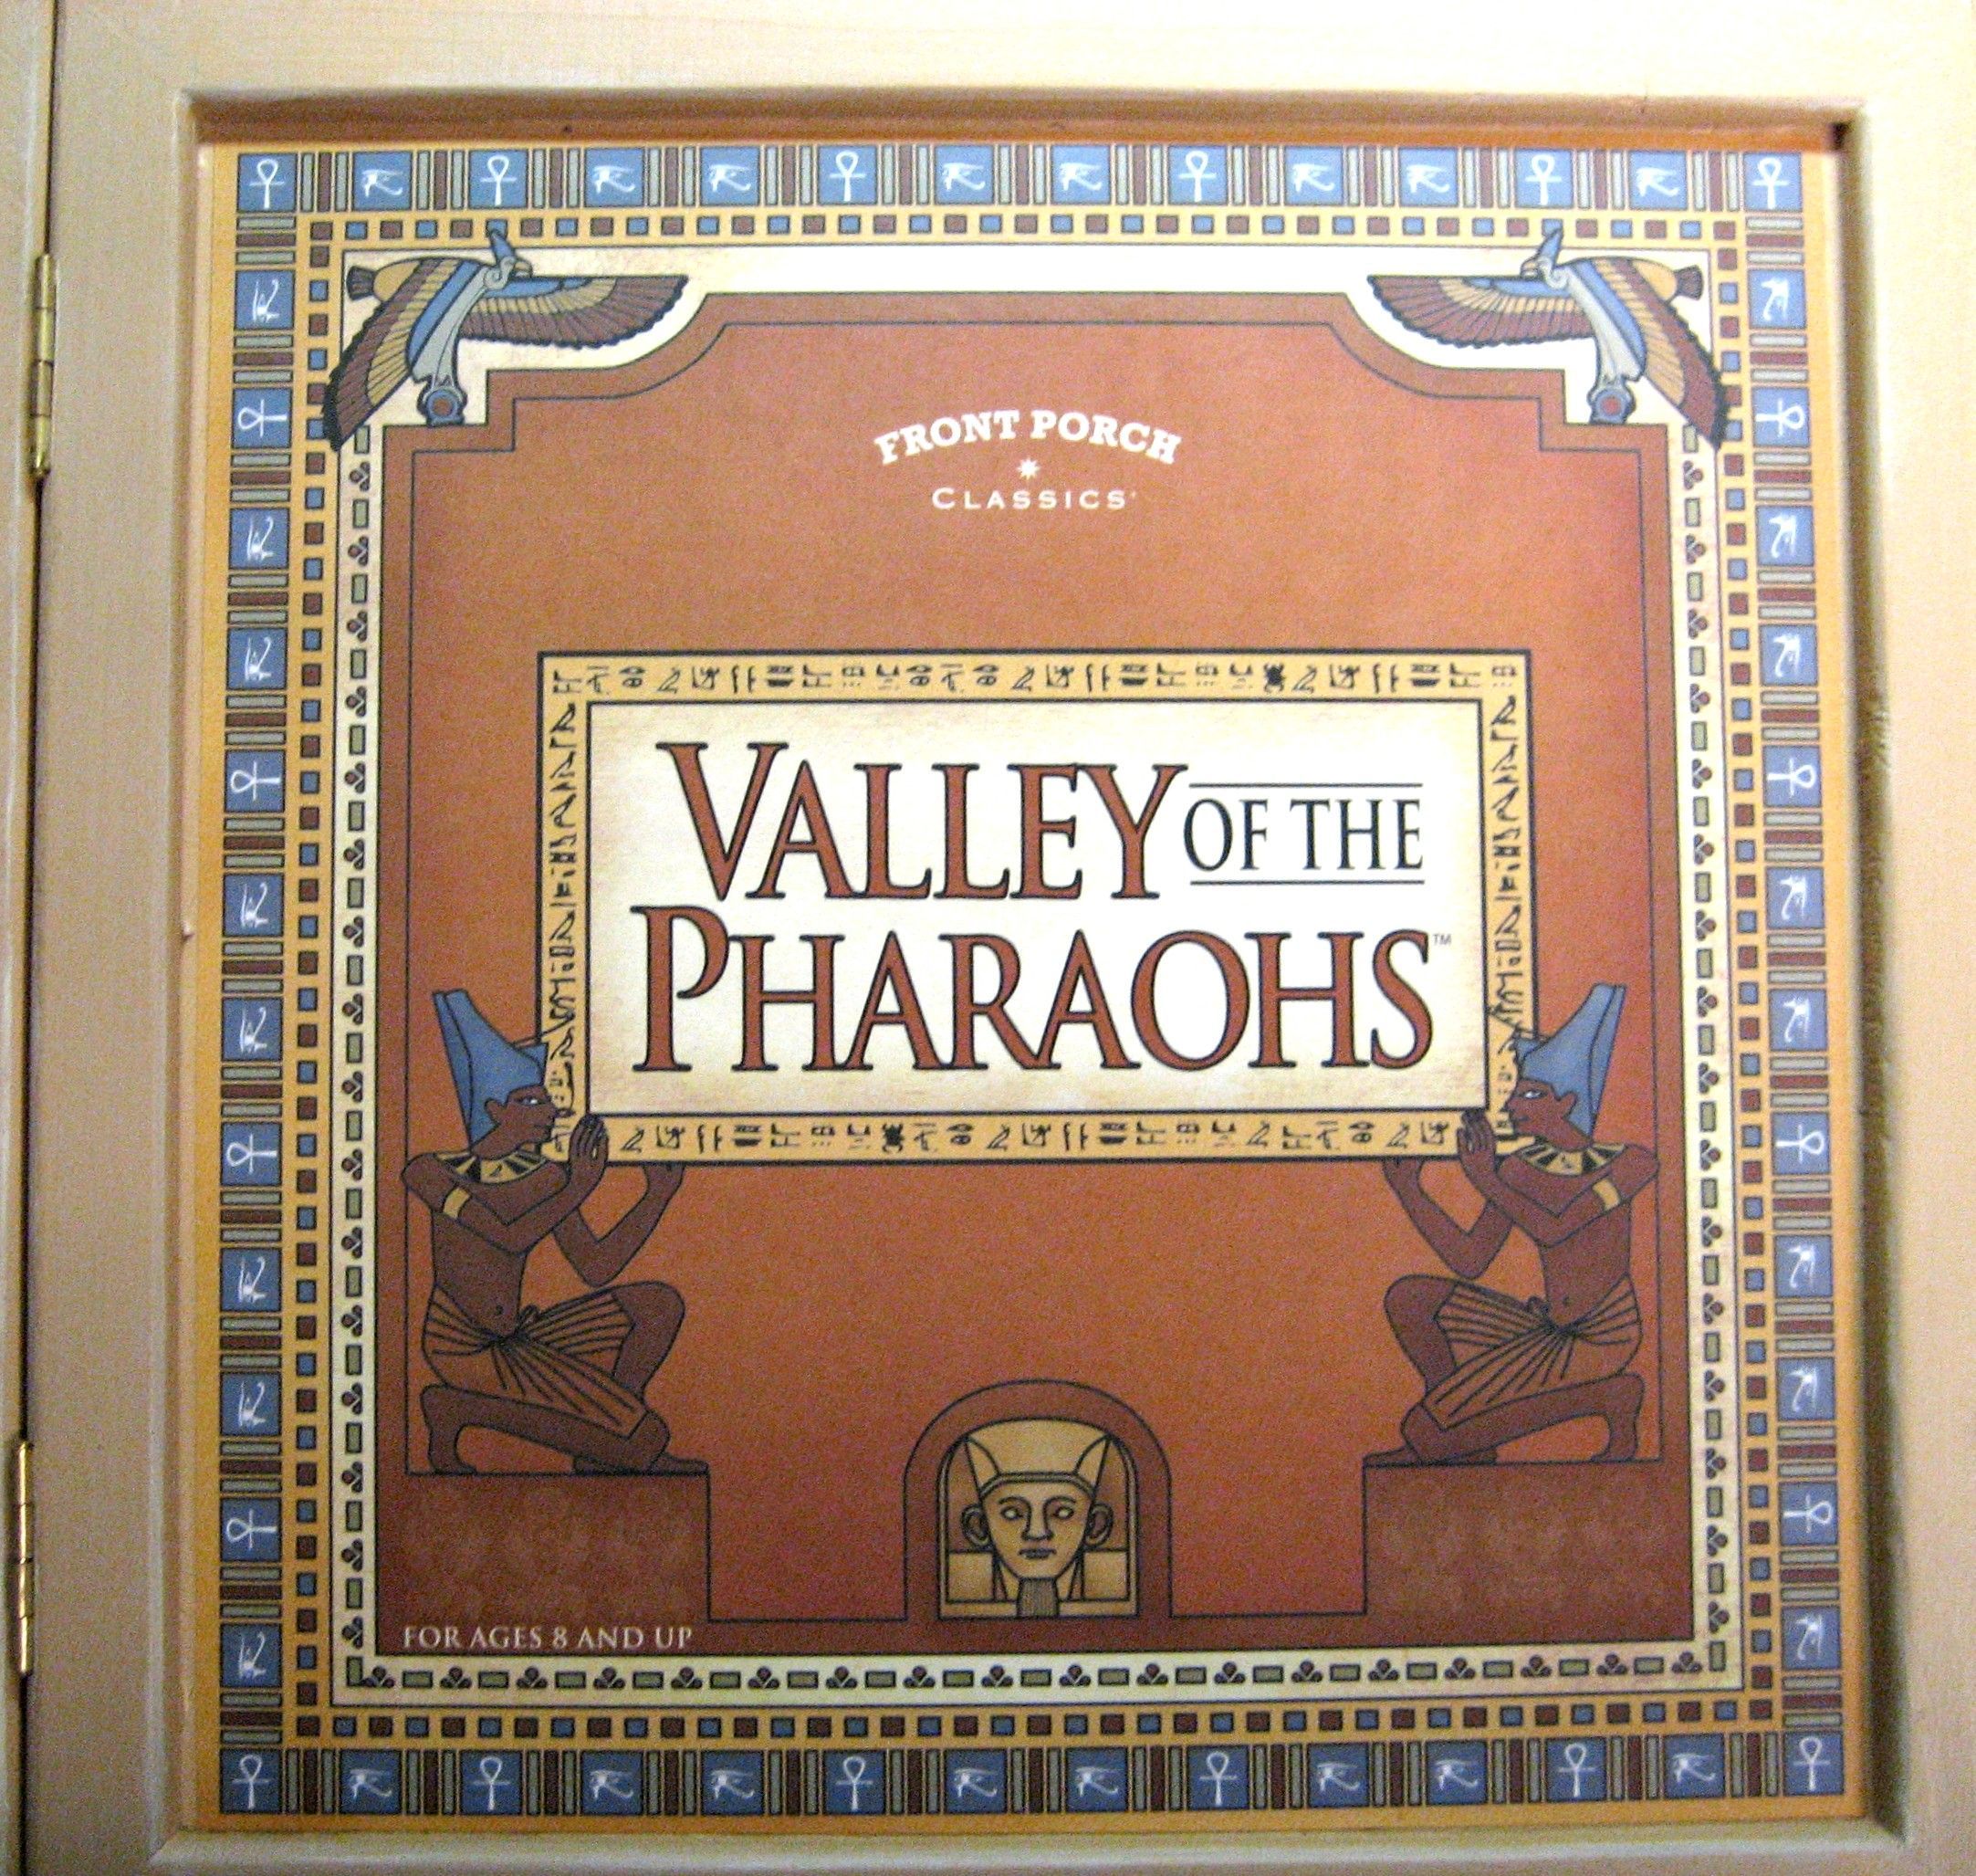 Valley of the Pharaohs